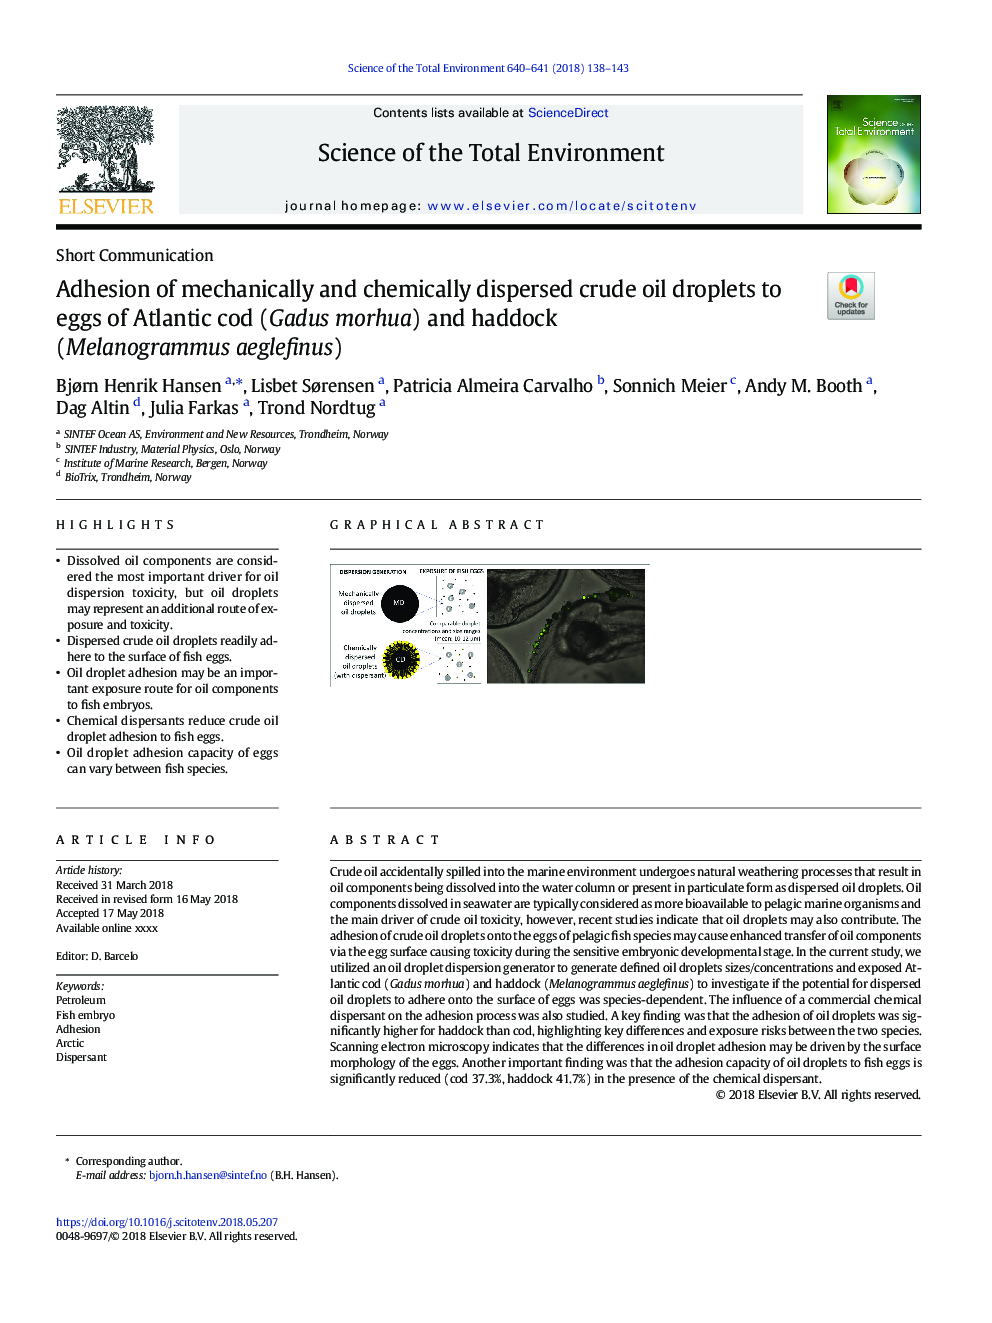 Adhesion of mechanically and chemically dispersed crude oil droplets to eggs of Atlantic cod (Gadus morhua) and haddock (Melanogrammus aeglefinus)